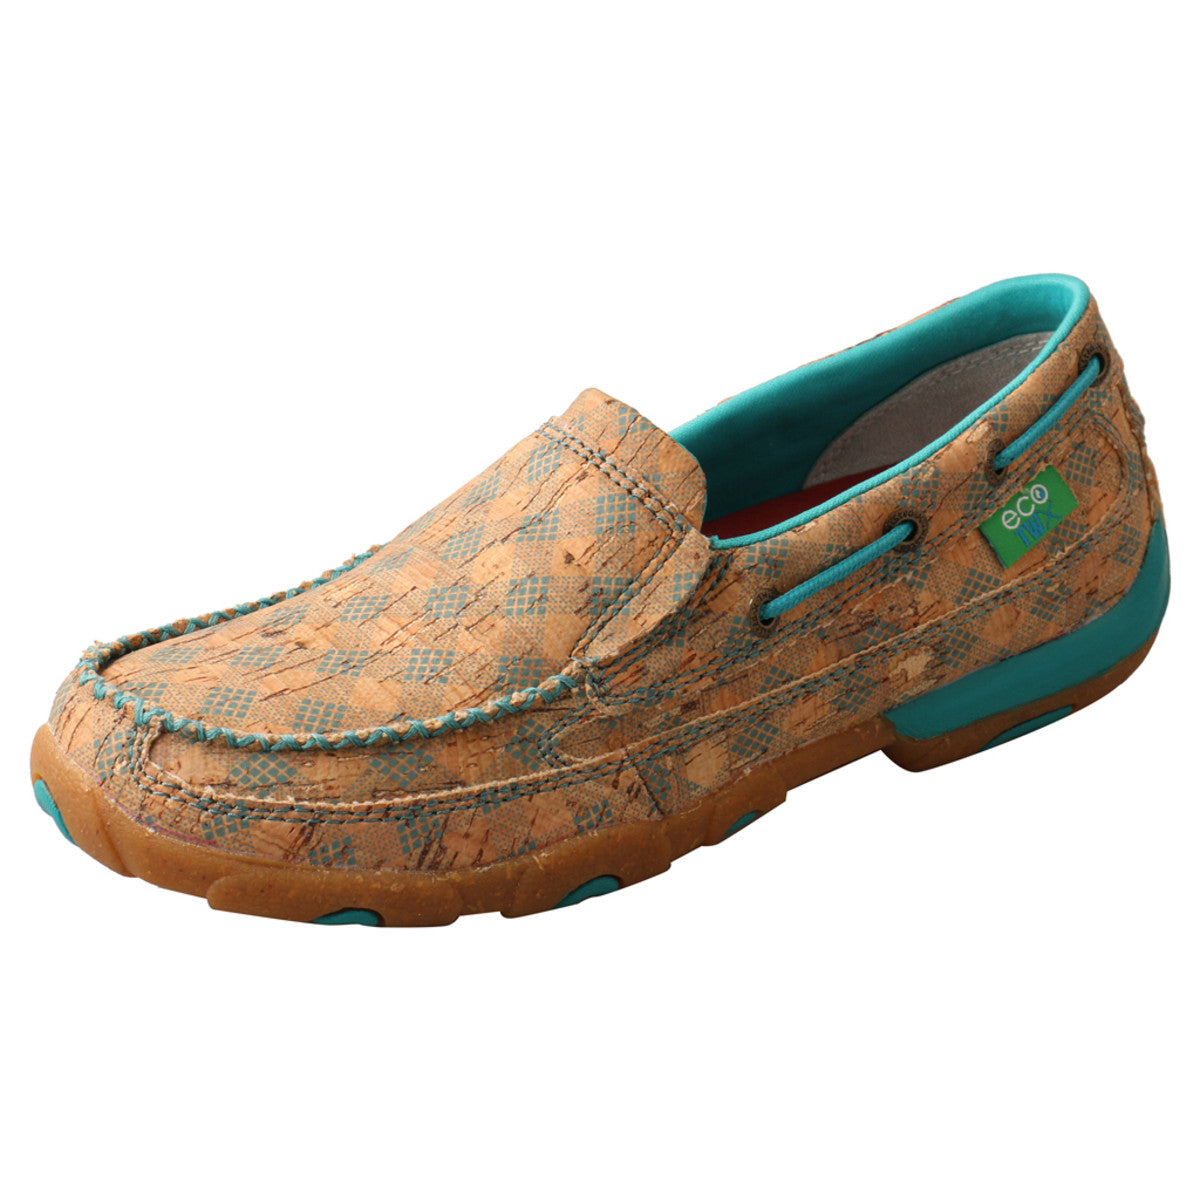 Women_s Twisted X Slip-On Driving Moccasins Shoe Tan Turquoise from the side